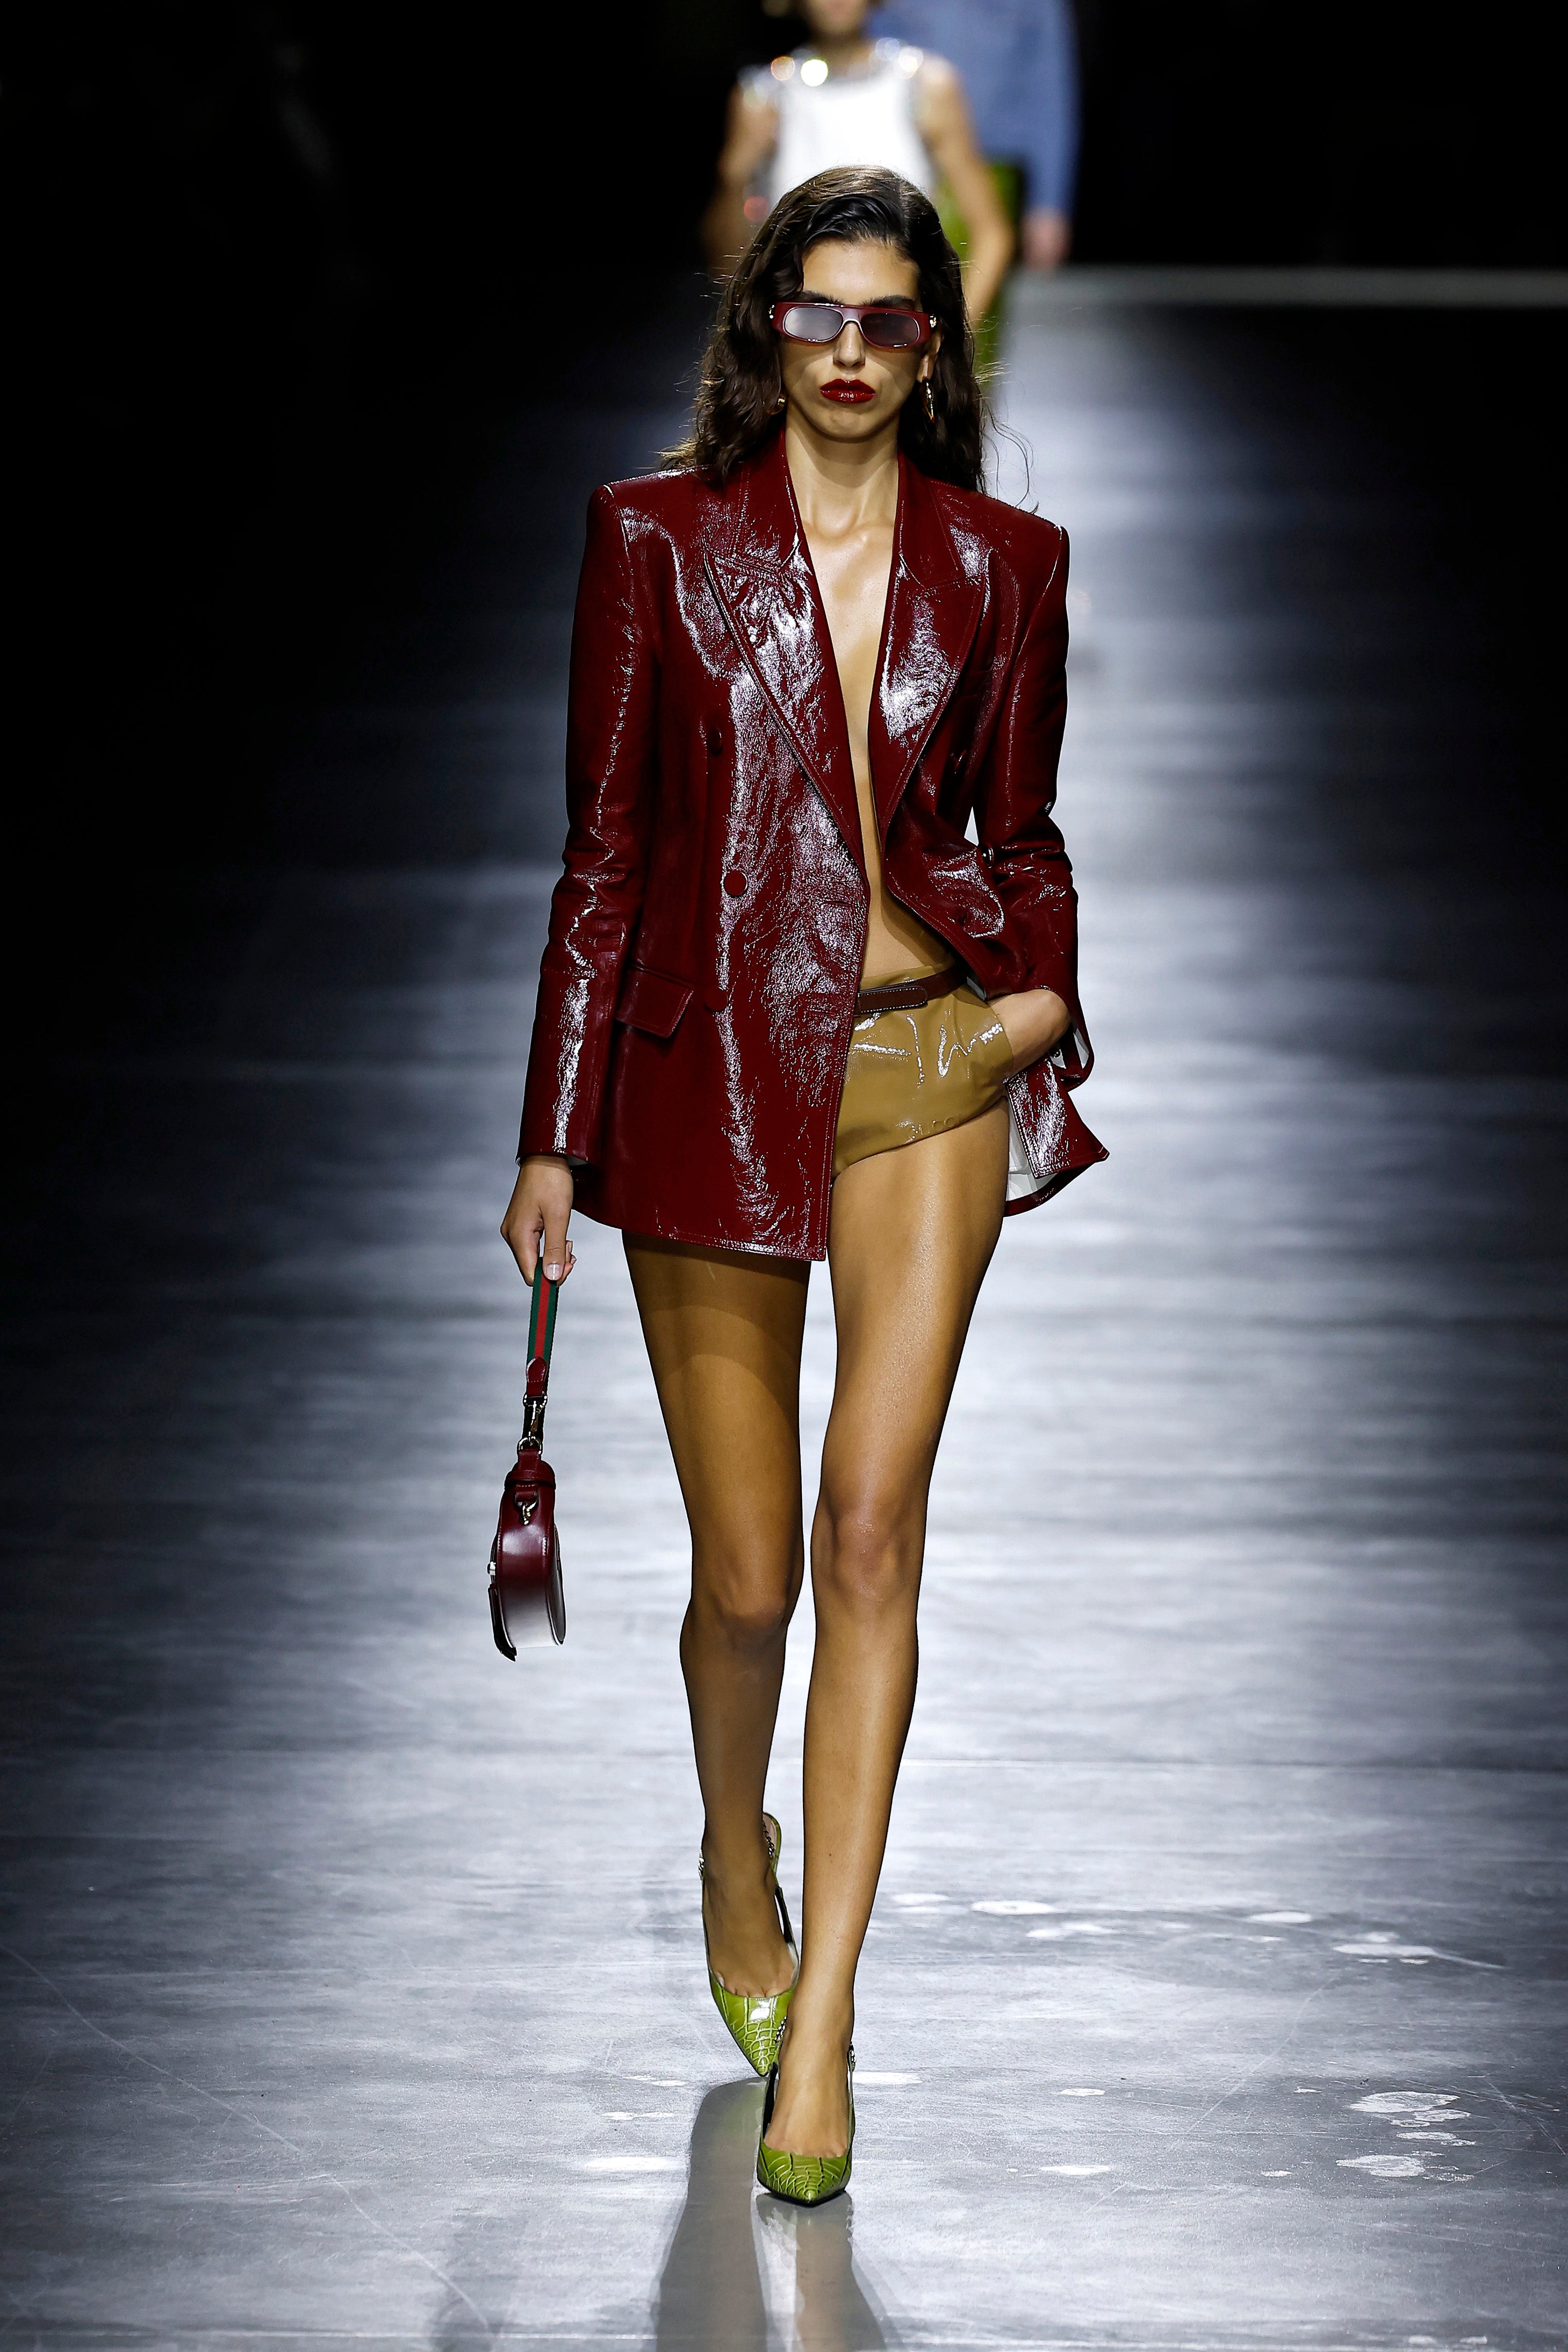 Underwear as Outerwear, the Pantastic trend hitting the runways